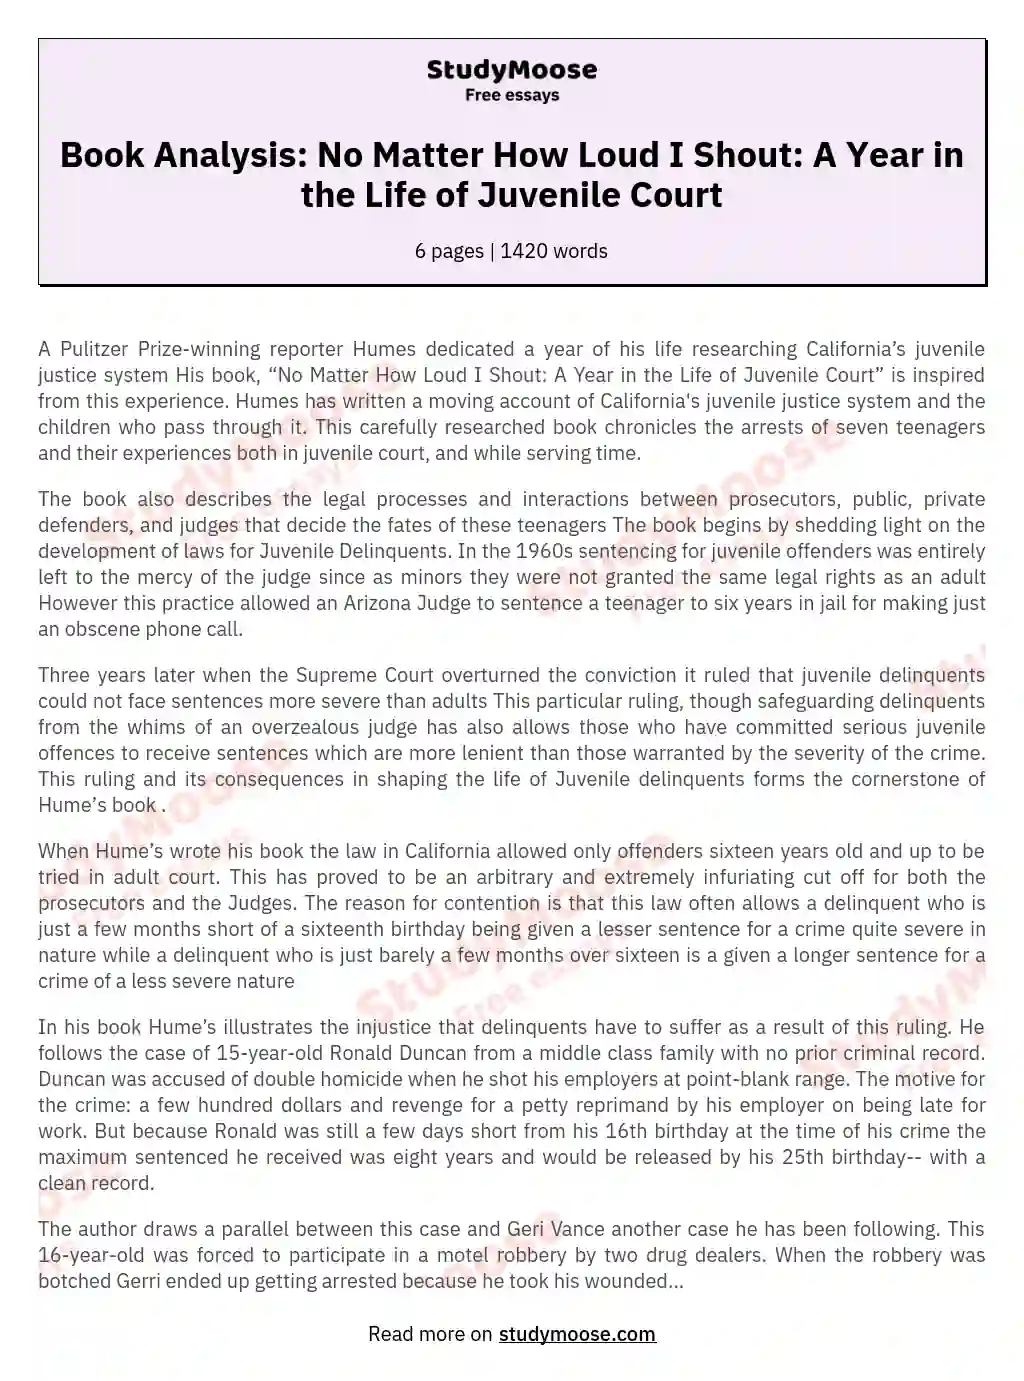 Book Analysis: No Matter How Loud I Shout: A Year in the Life of Juvenile Court essay